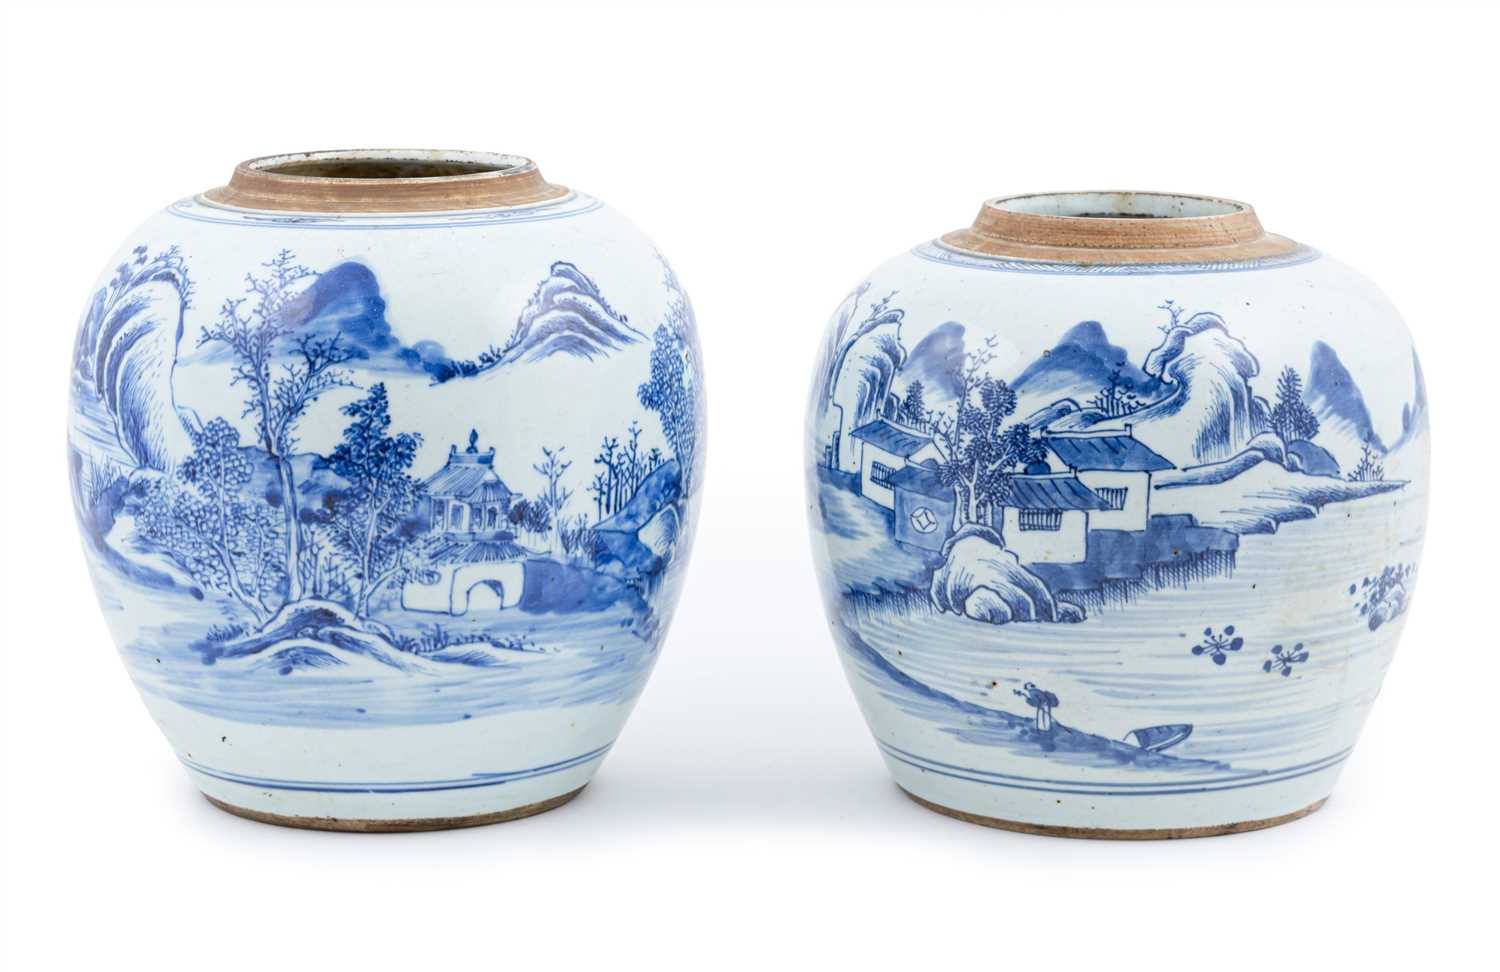 Lot 58 - Chinese blue and white porcelain jar, probably late Imperial